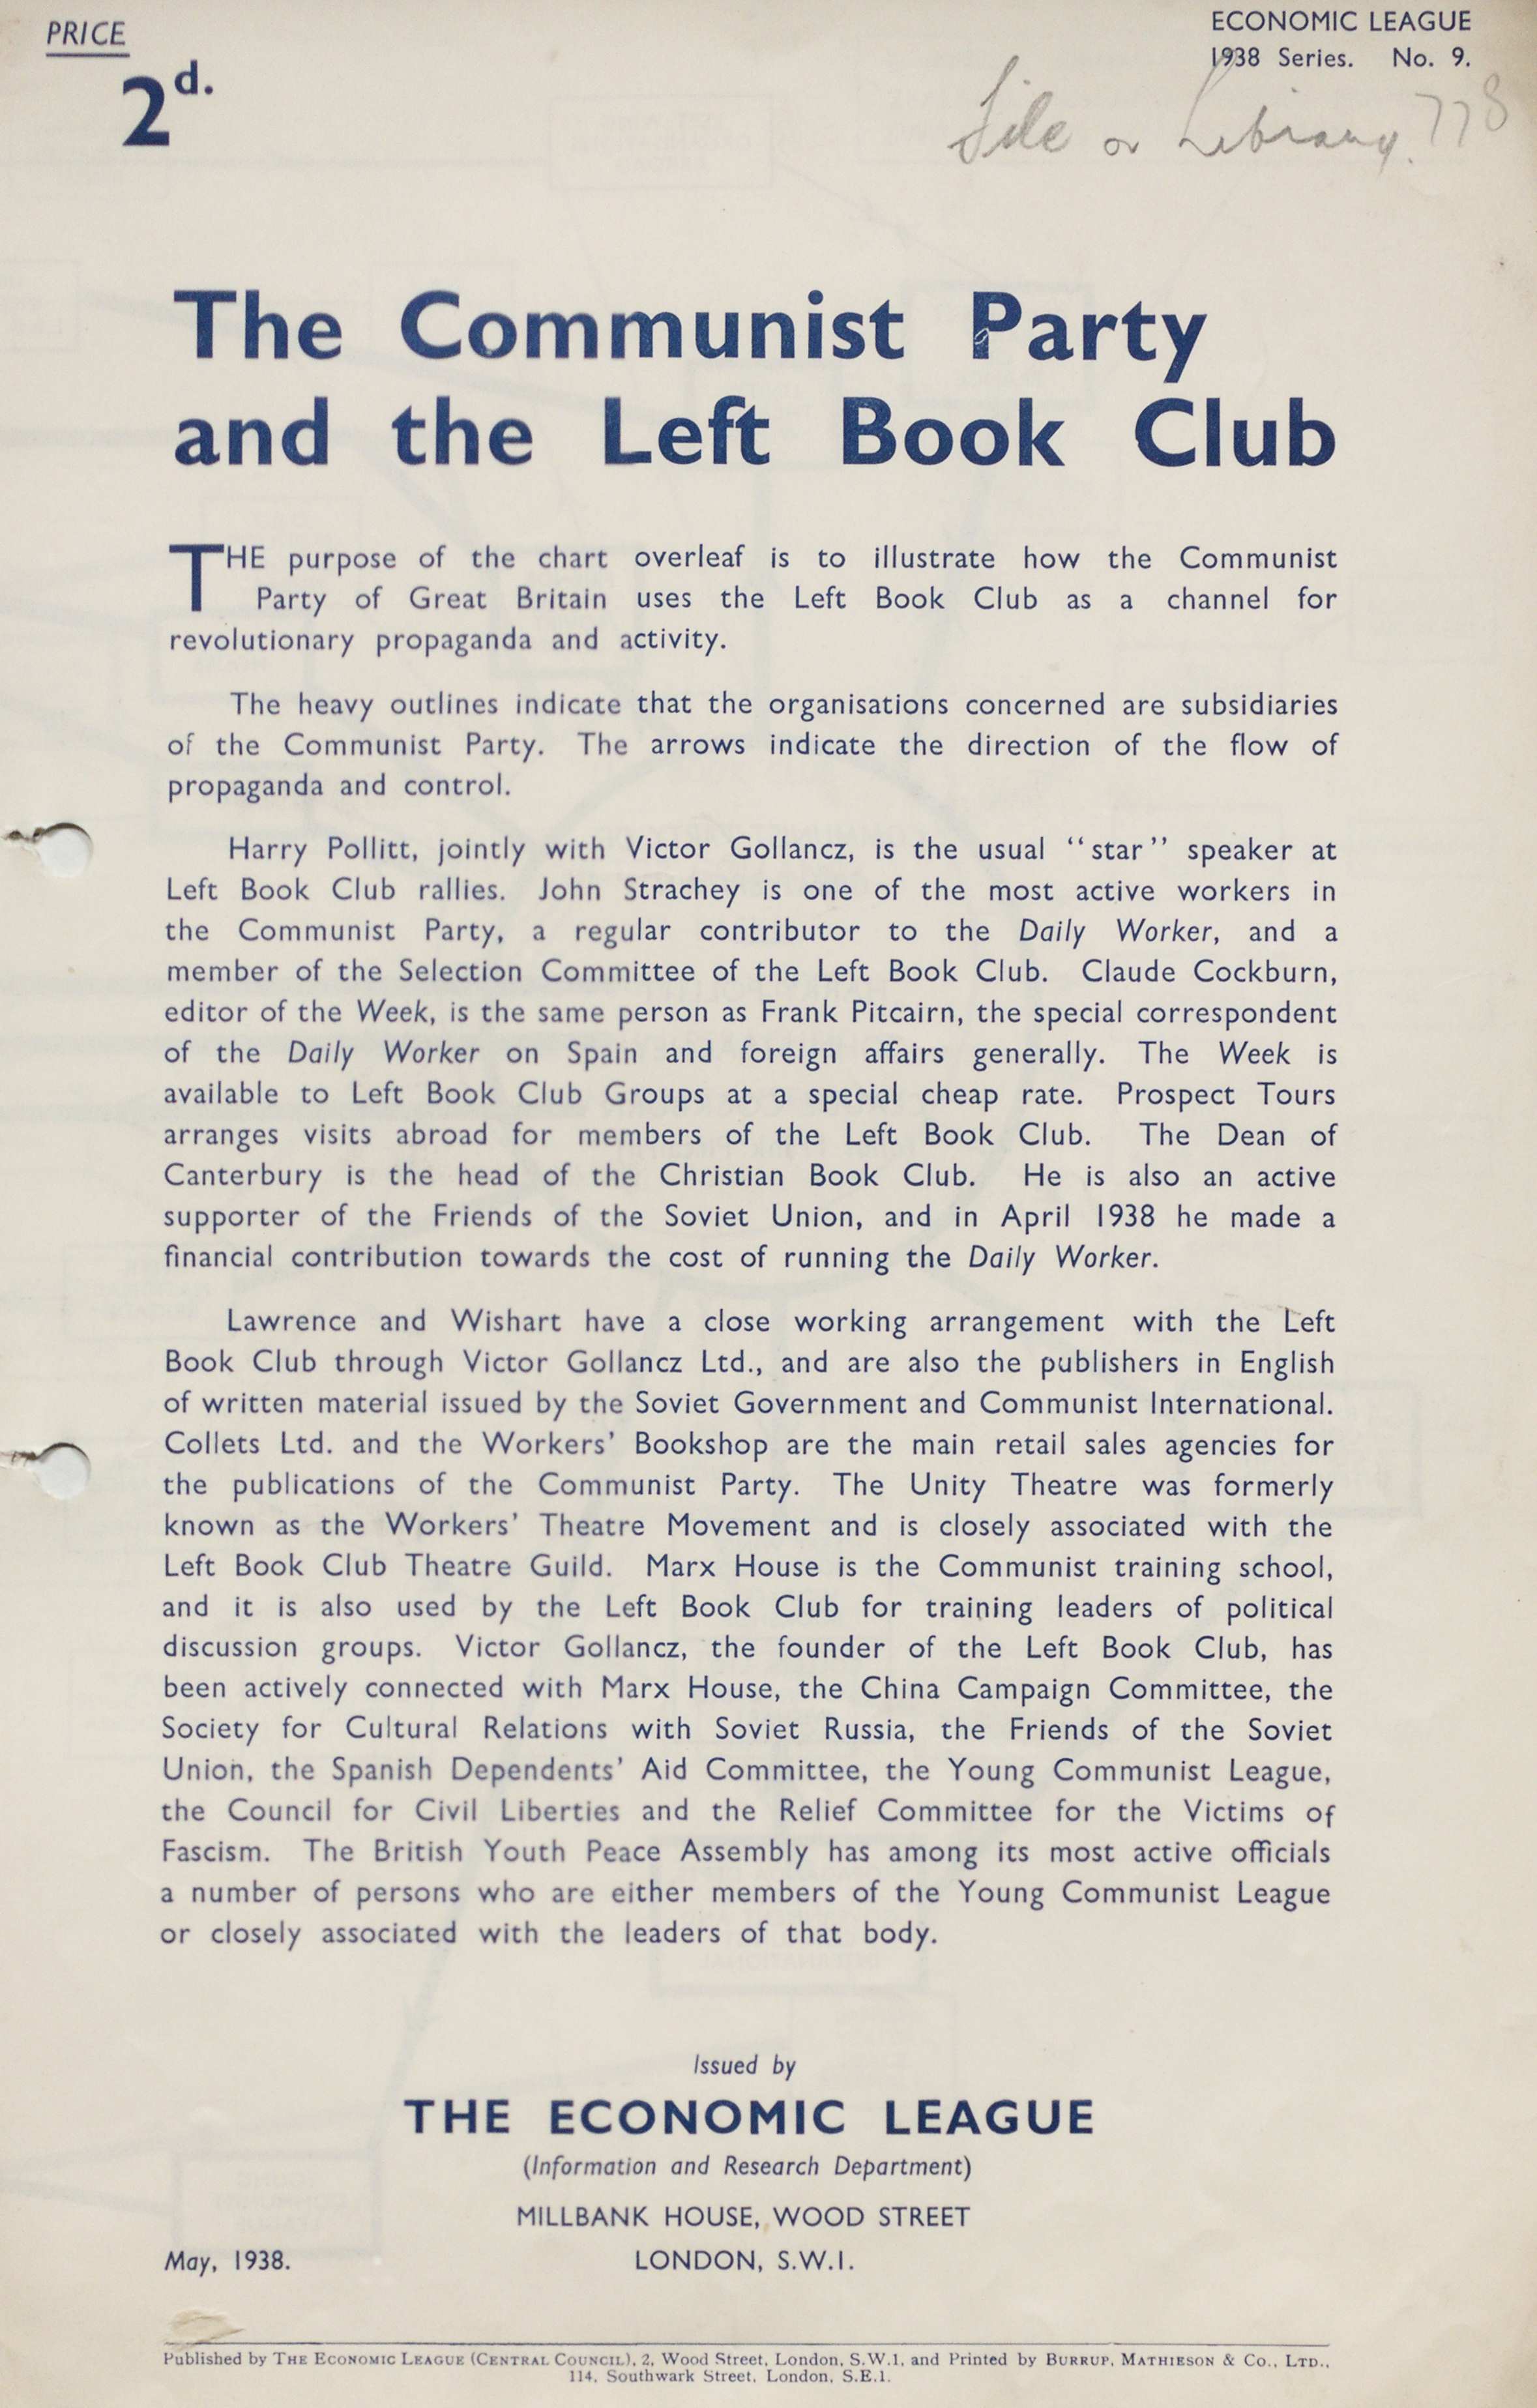 The Communist Party and the Left Book Club